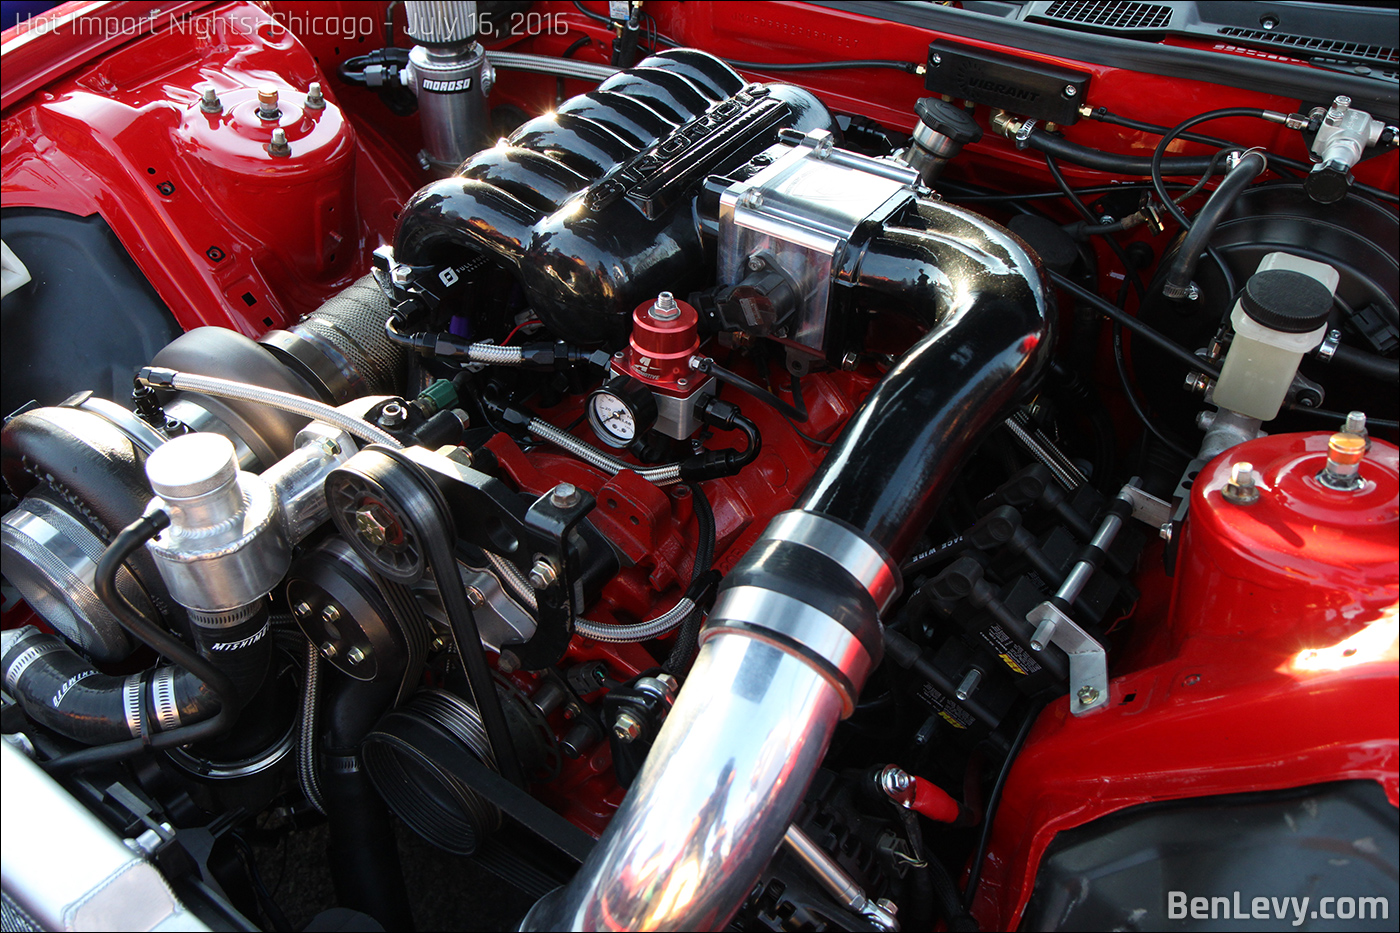 3 Rotor Engine with Big Turbo in RX-7